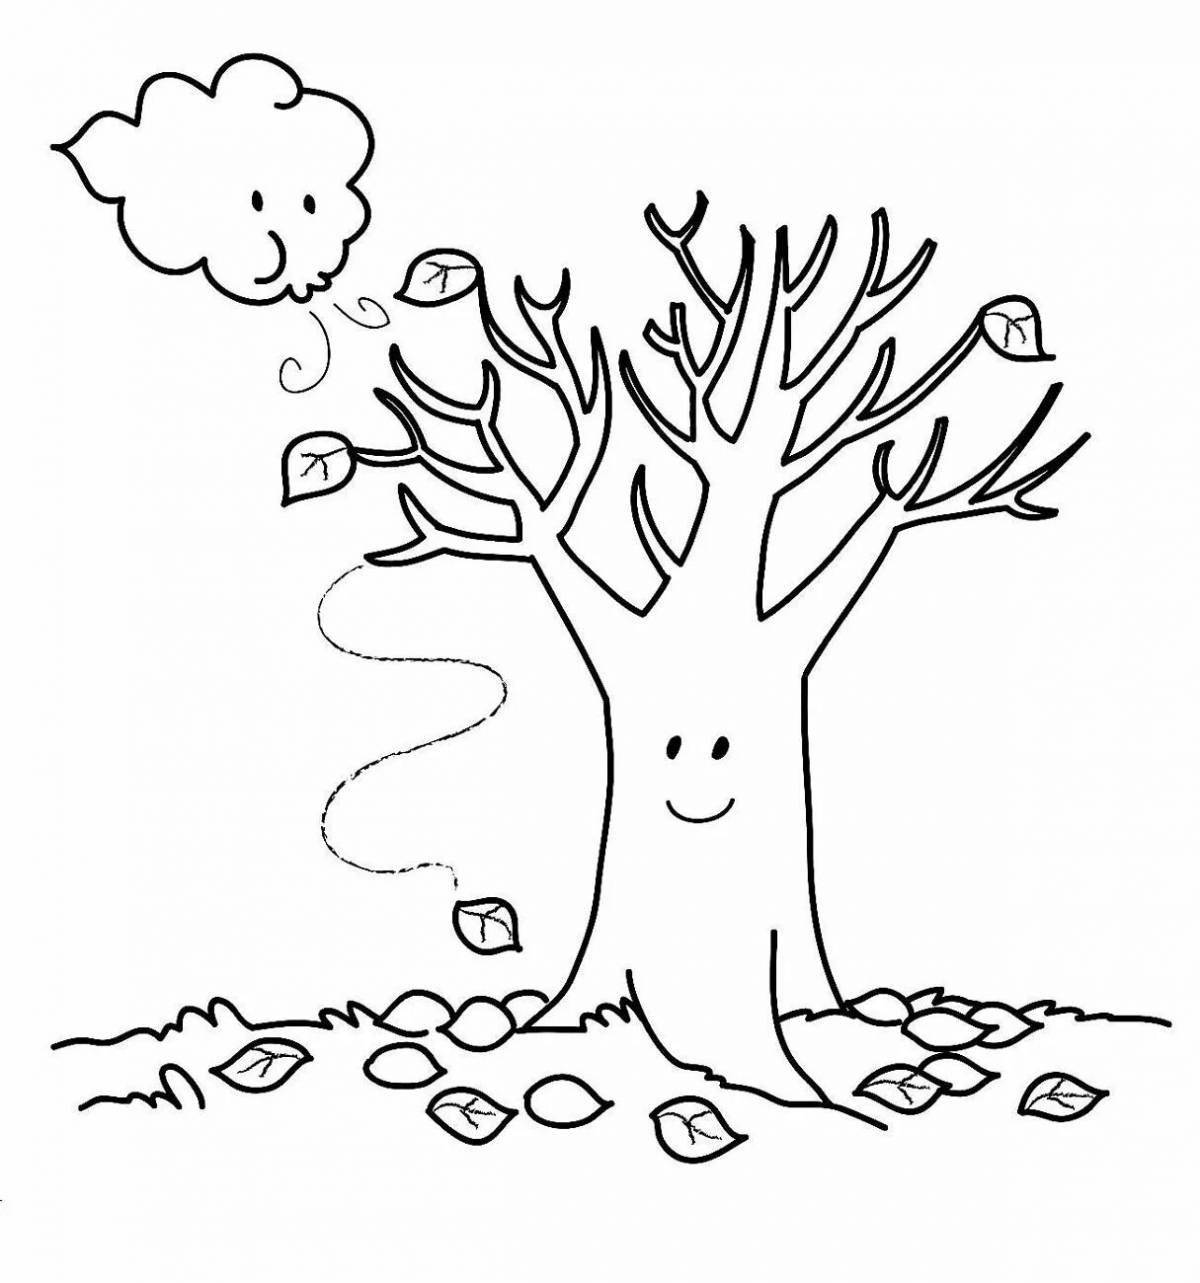 Vivid winter tree coloring pages for kids